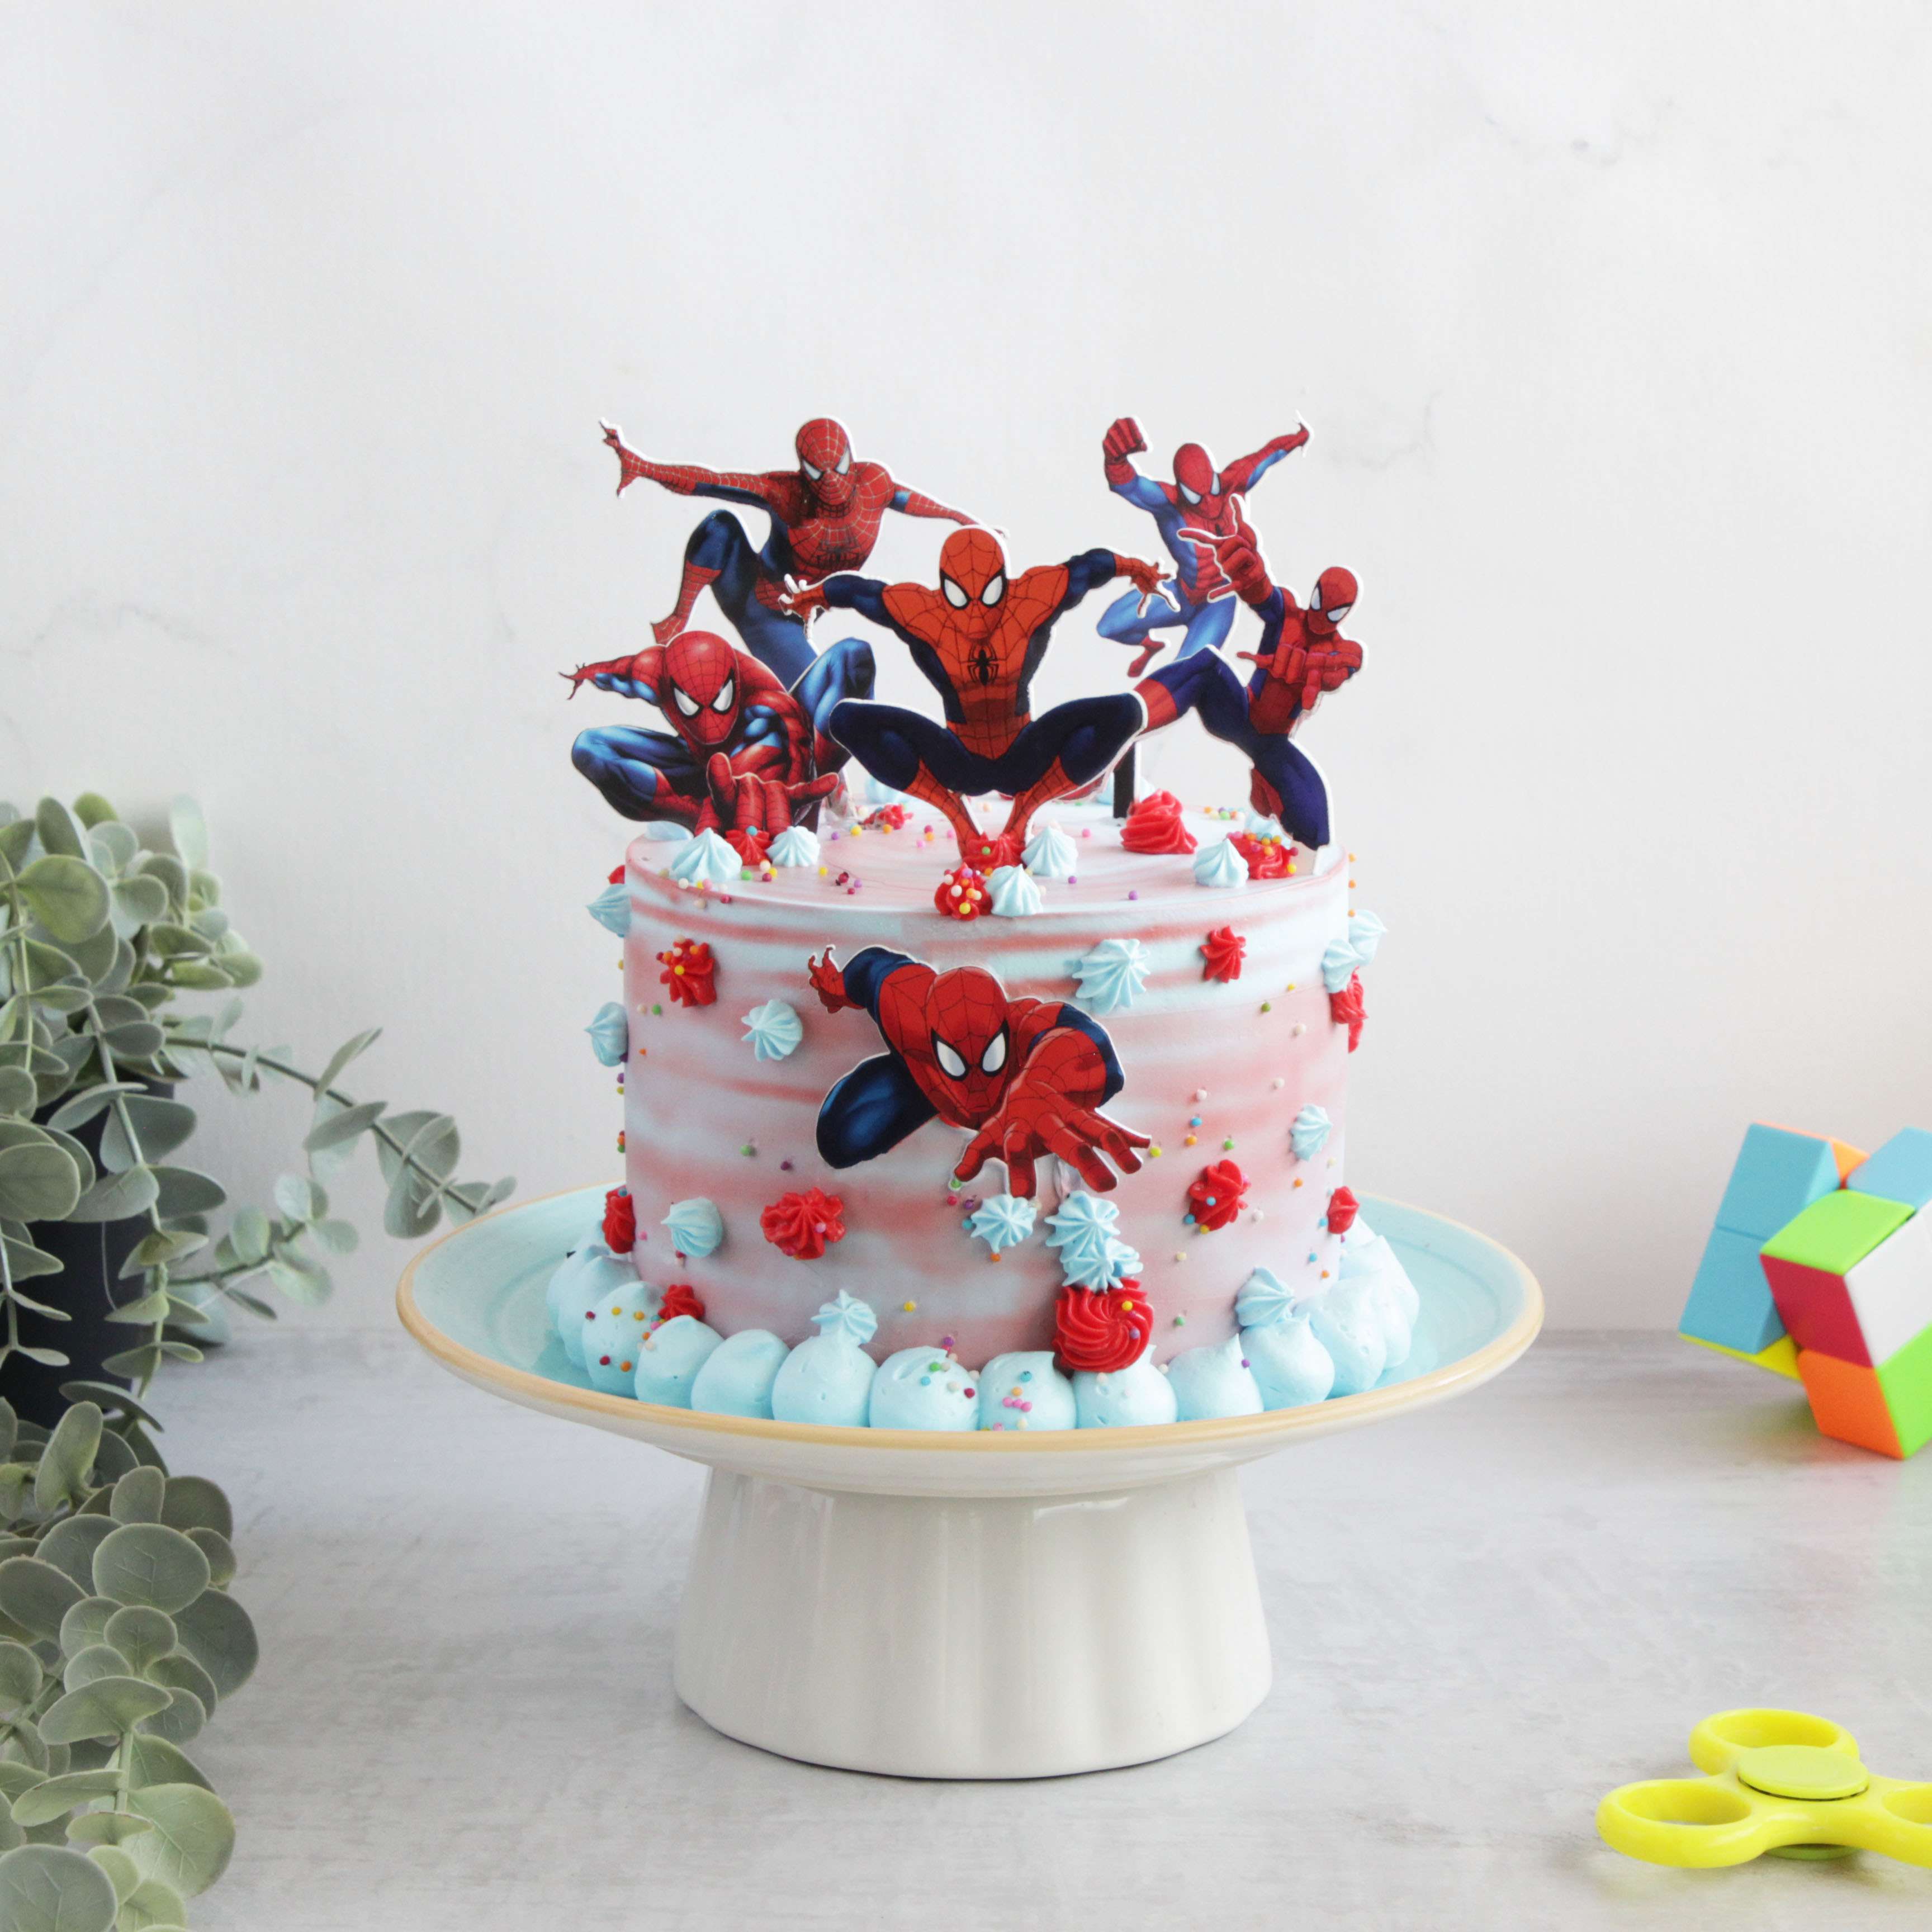 Kid's Birthday Cakes Sydney | Order with Sydney-Wide Delivery